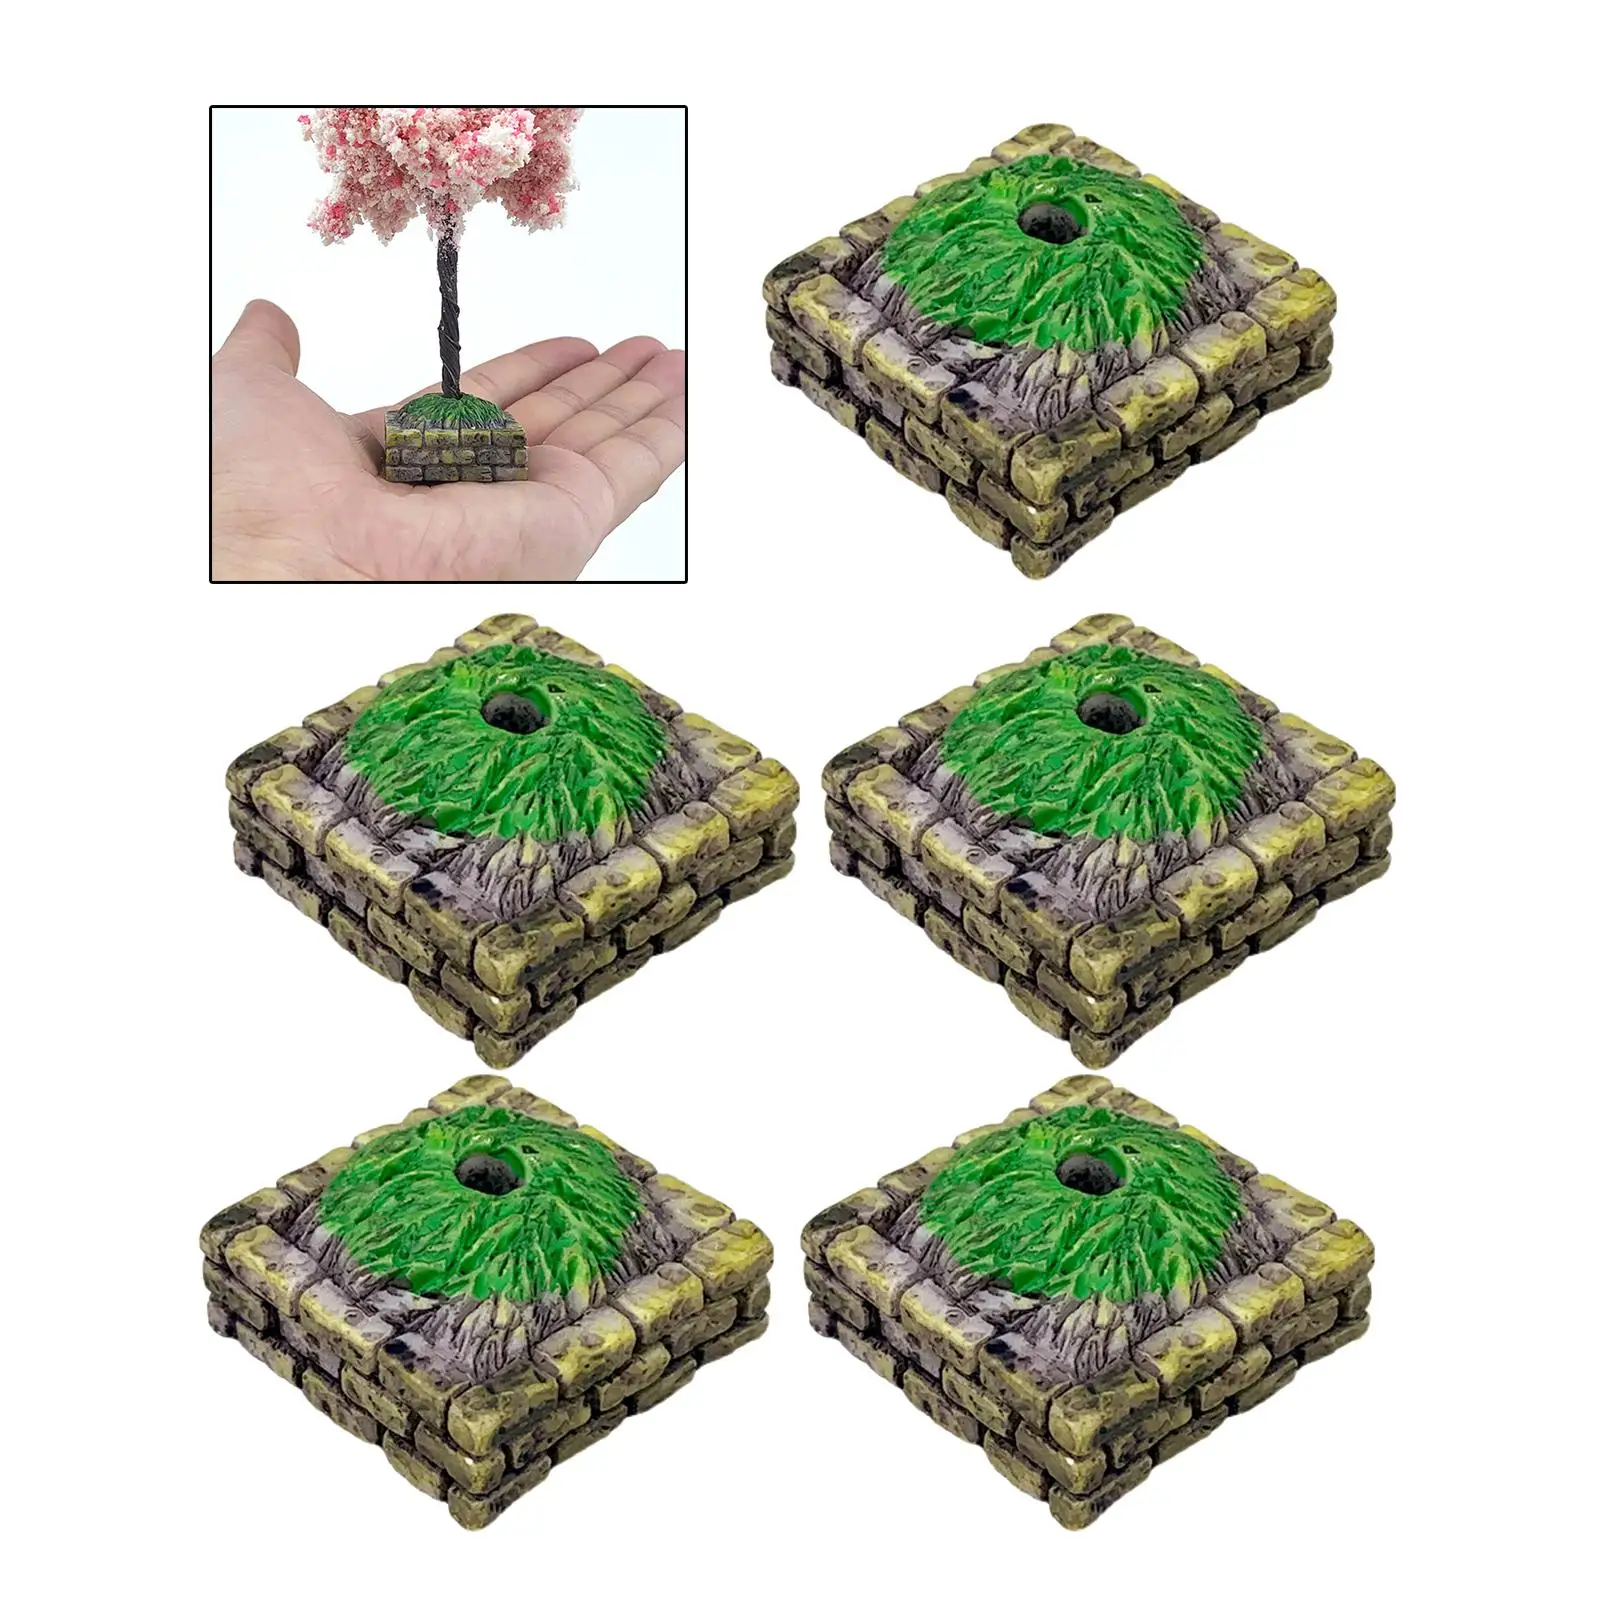 5x Figurines Multipurpose DIY Supplies Practical Gifts for Micro Landscape